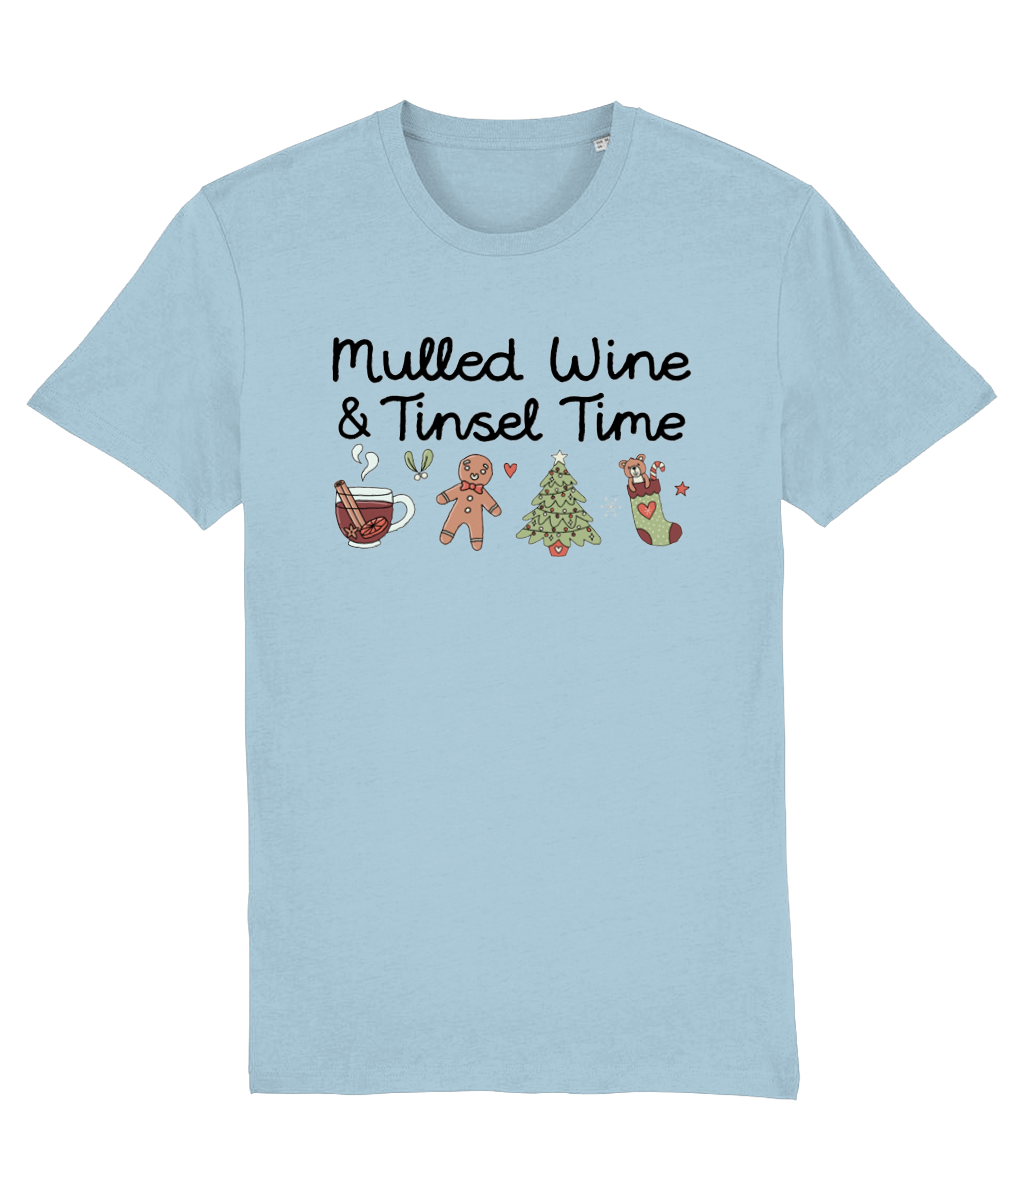 Mulled Wine & Tinsel Time - Adult T-Shirt - Light Multi Colour Available